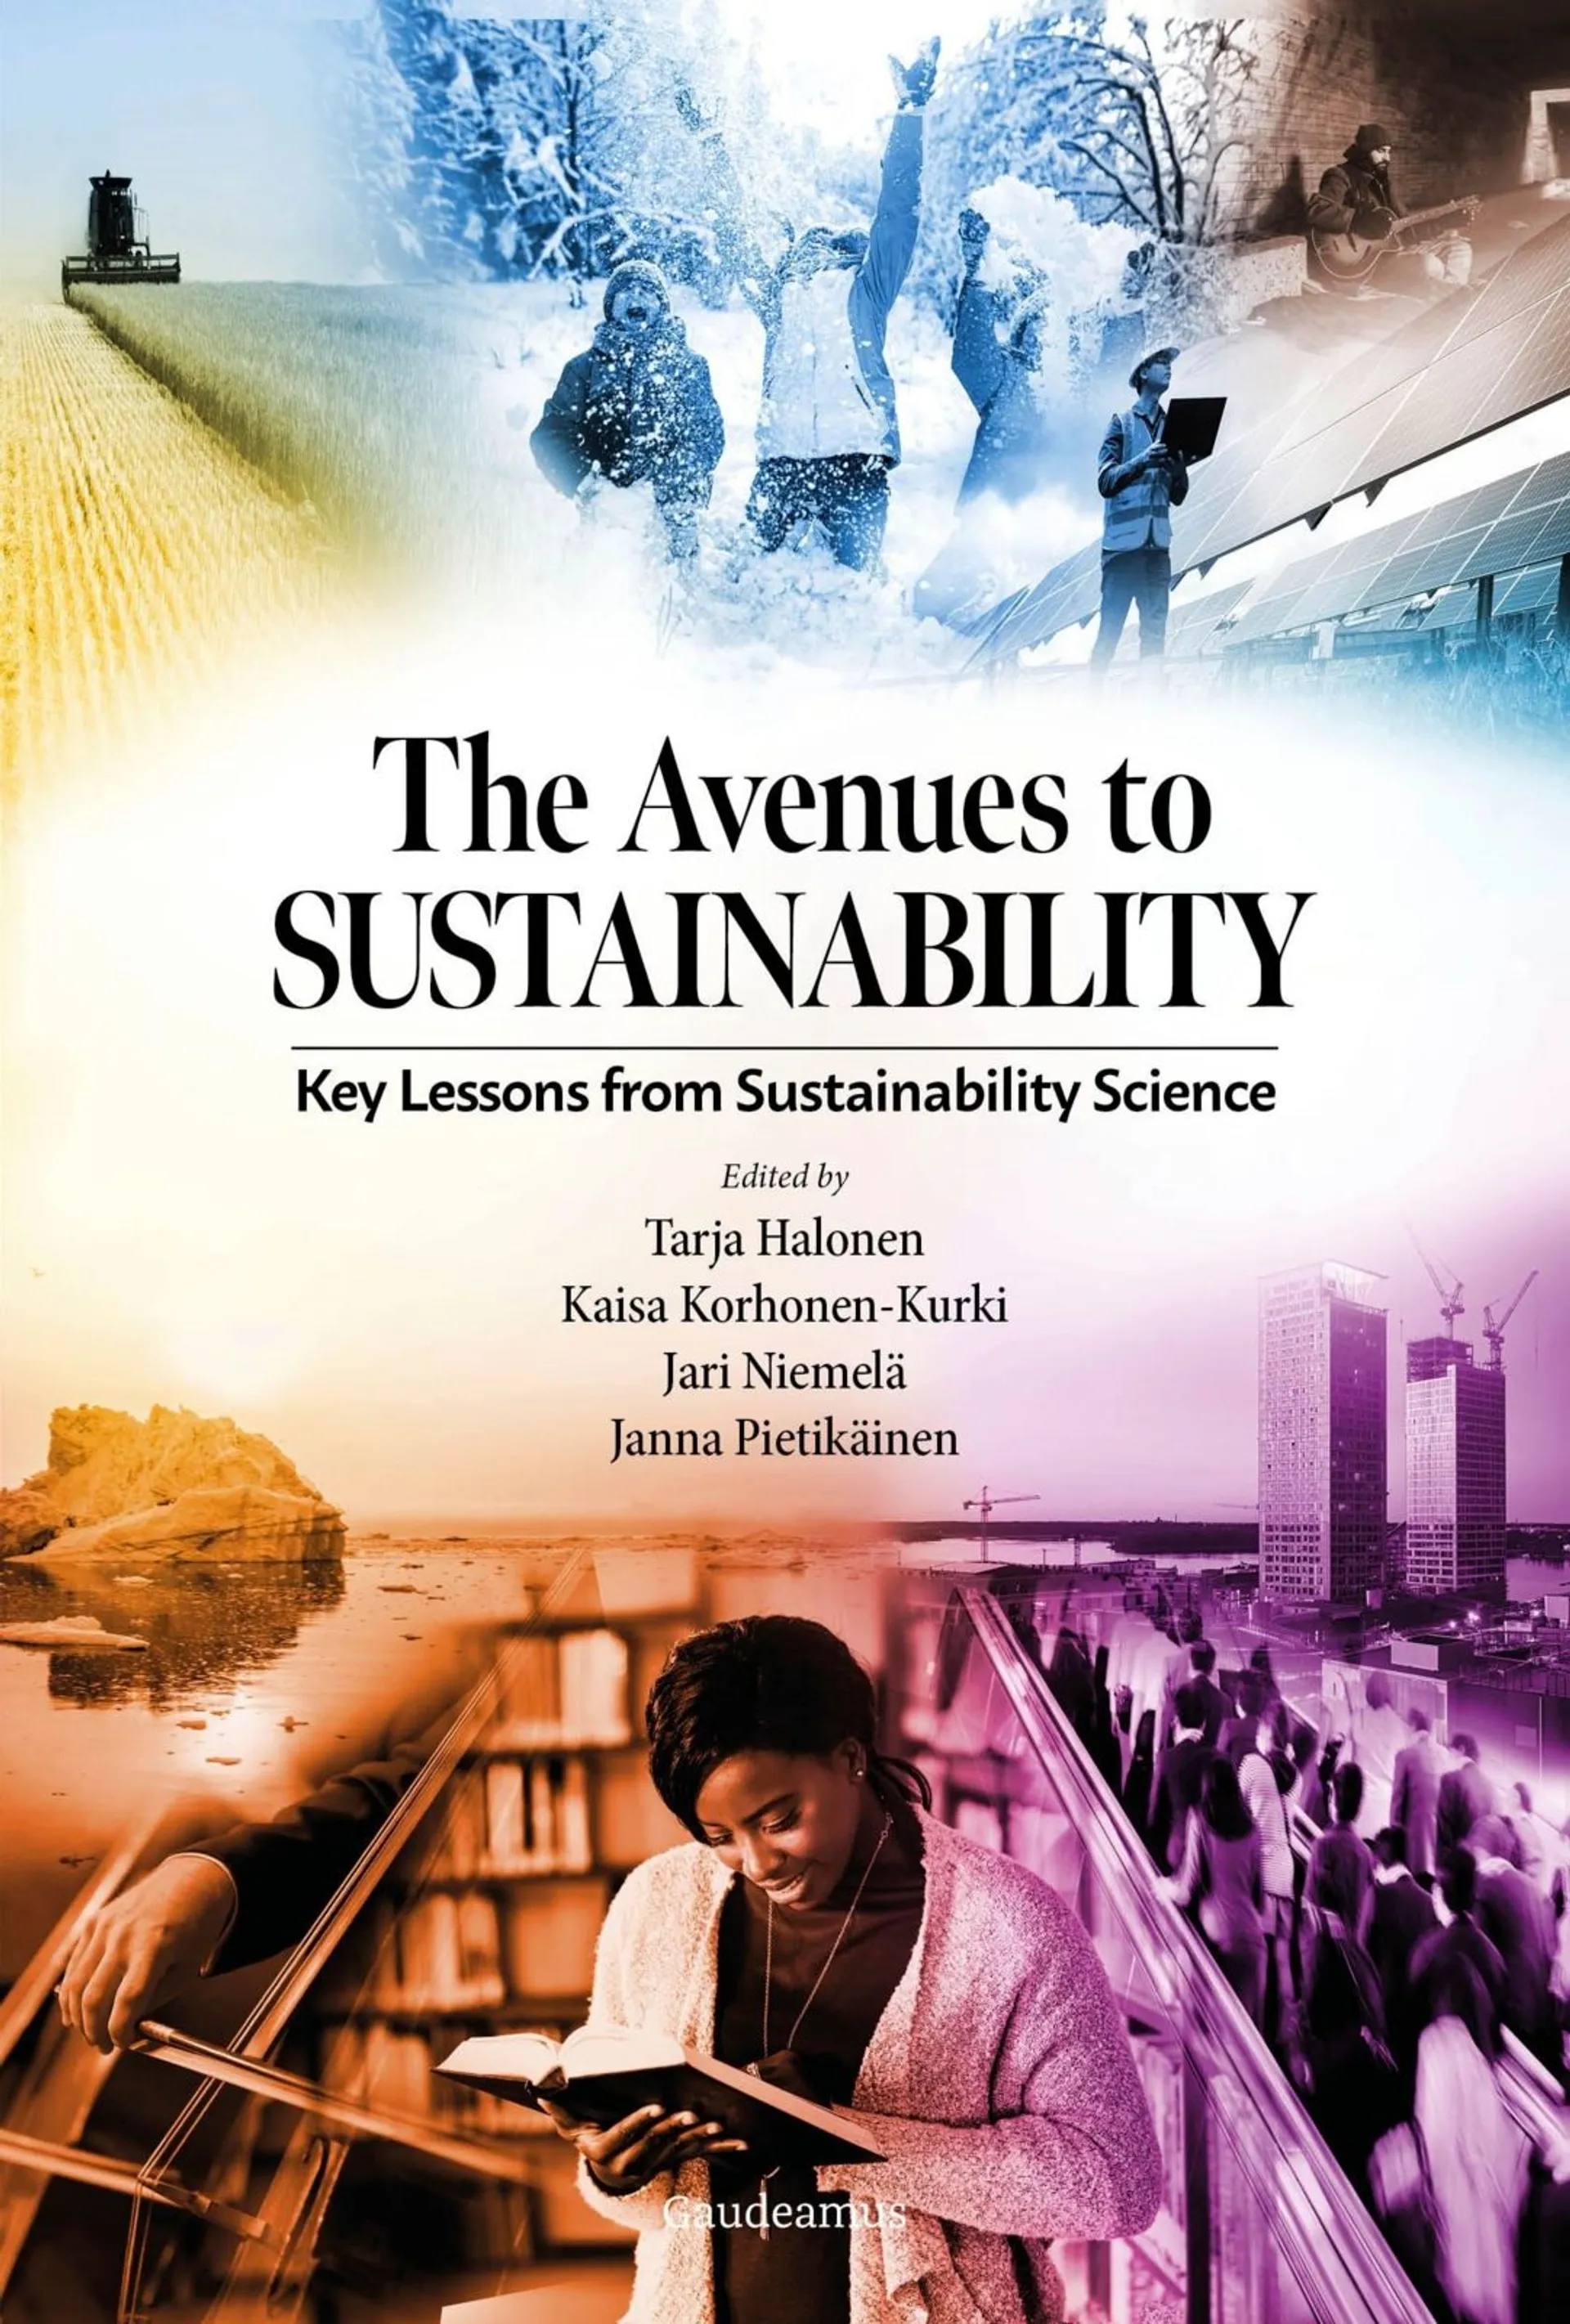 The Avenues to Sustainability - Key Lessons from Sustainability Science